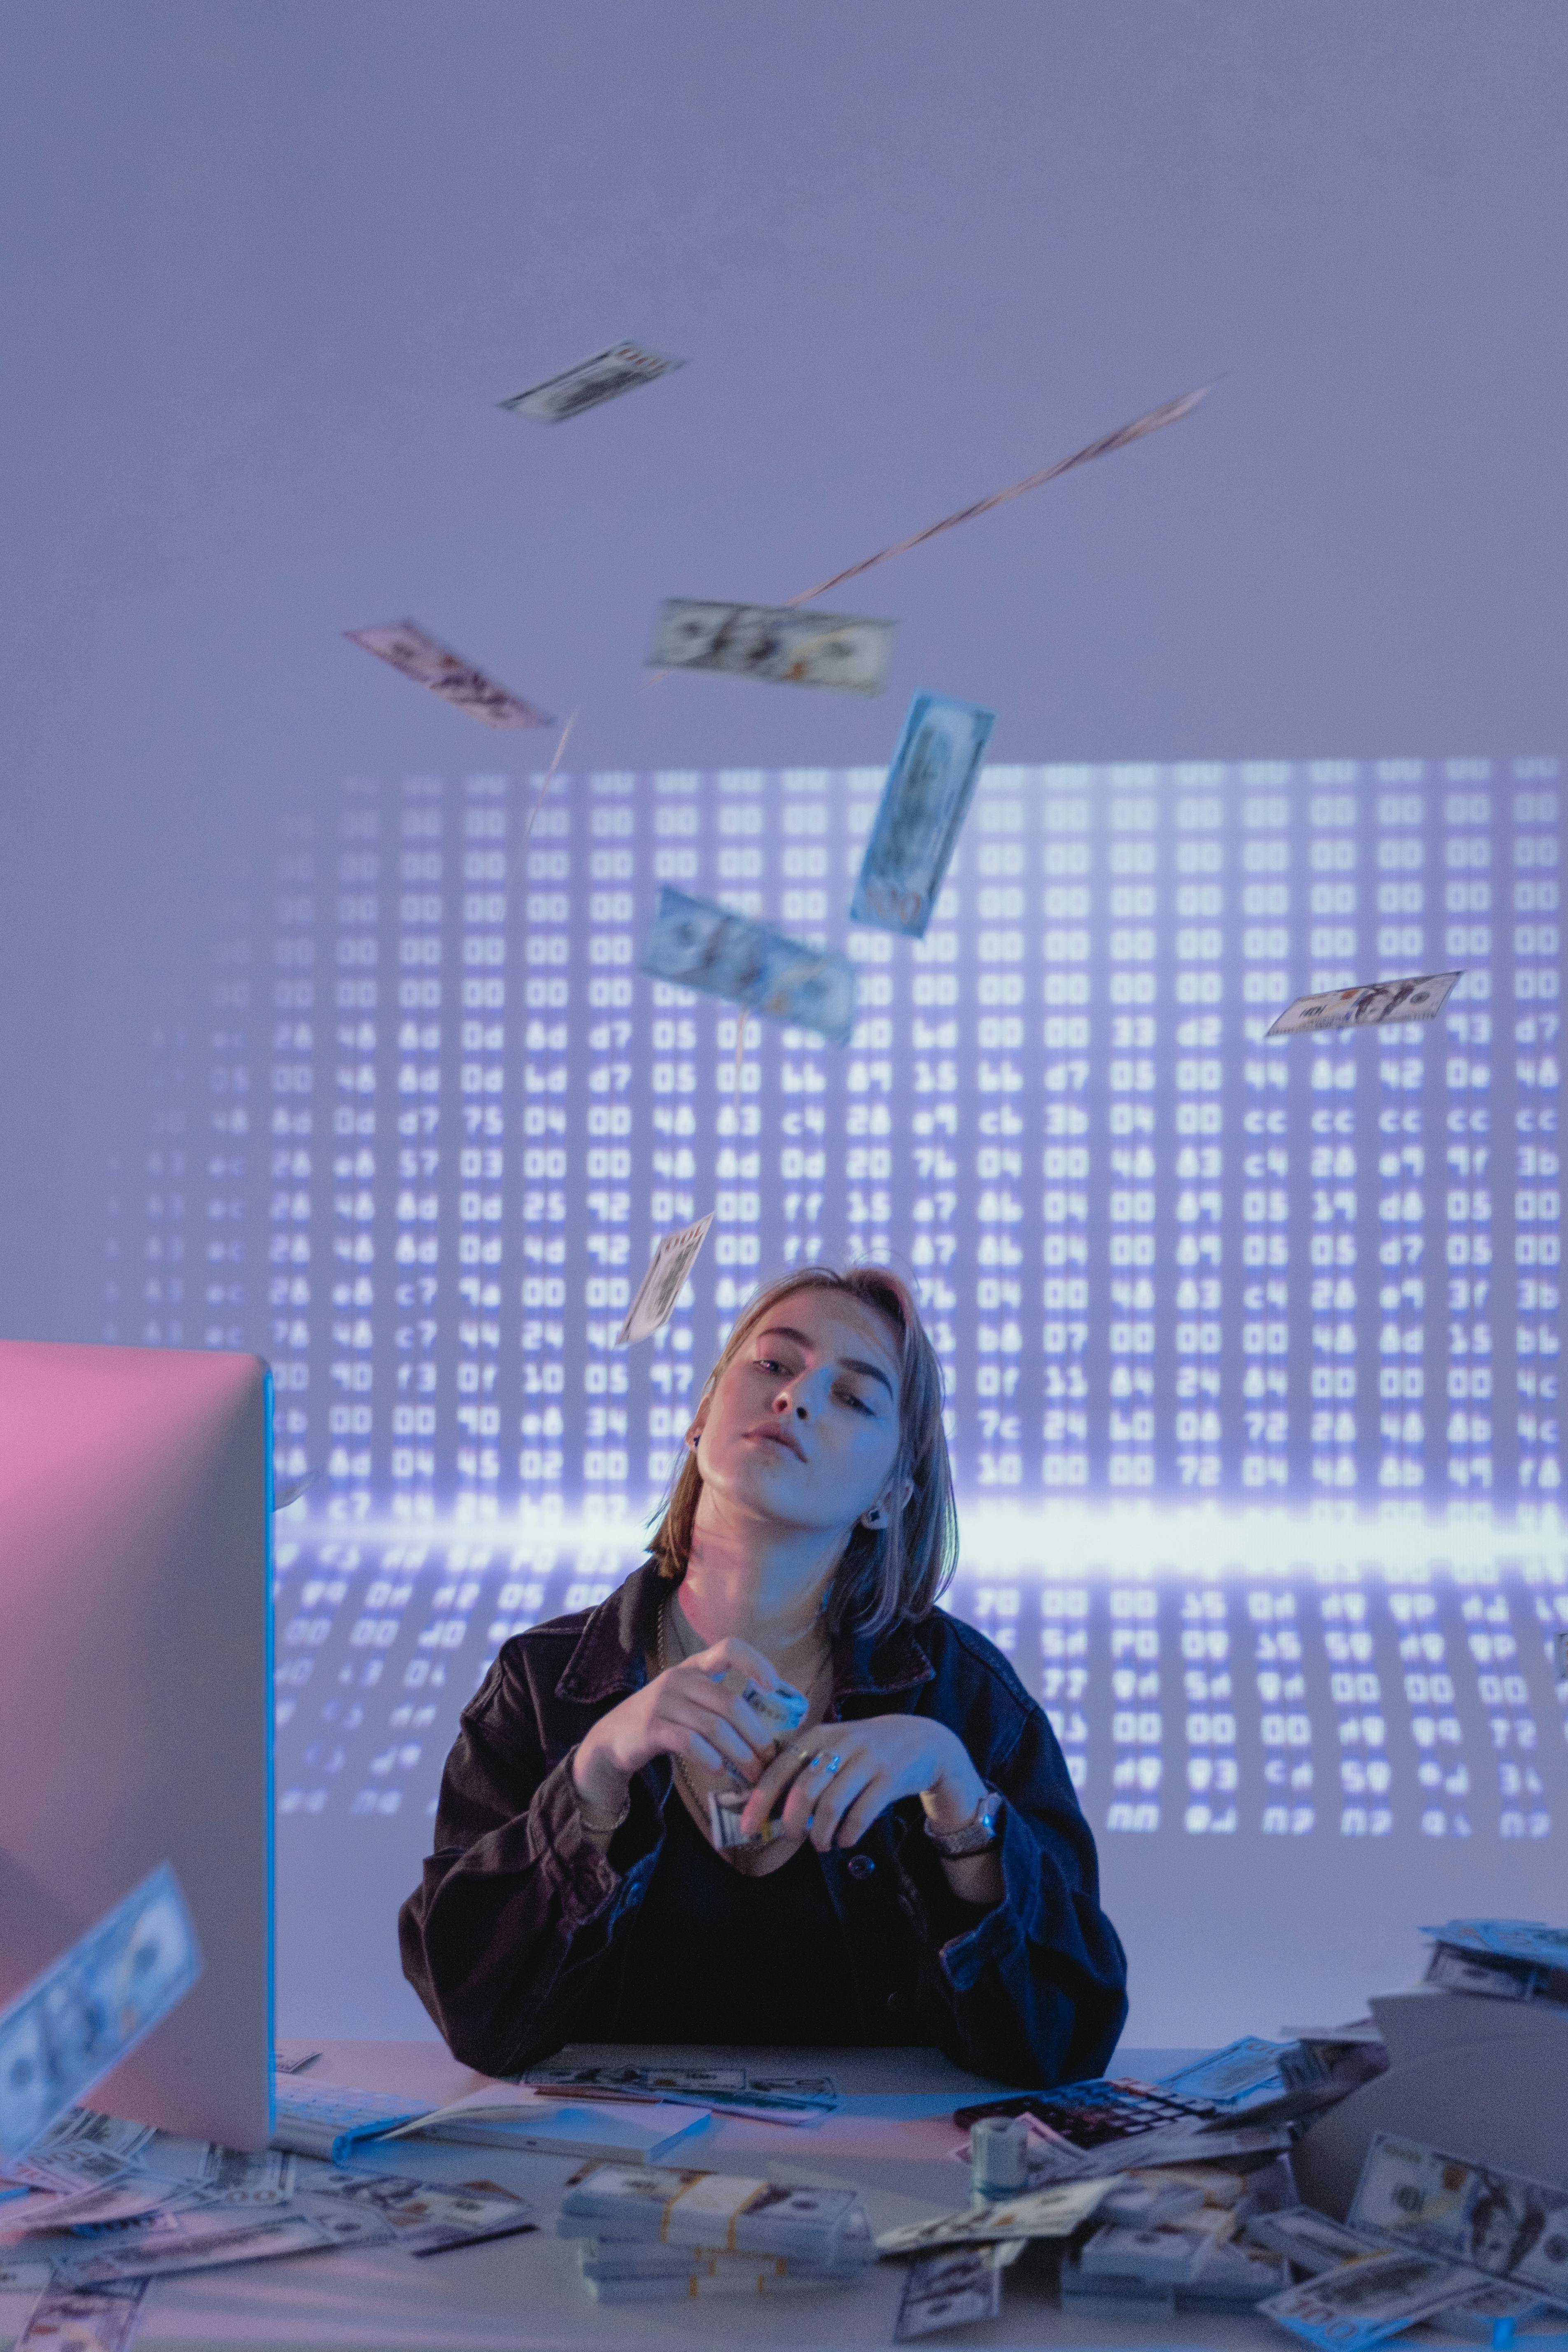 A woman throwing money around | Source: Pexels